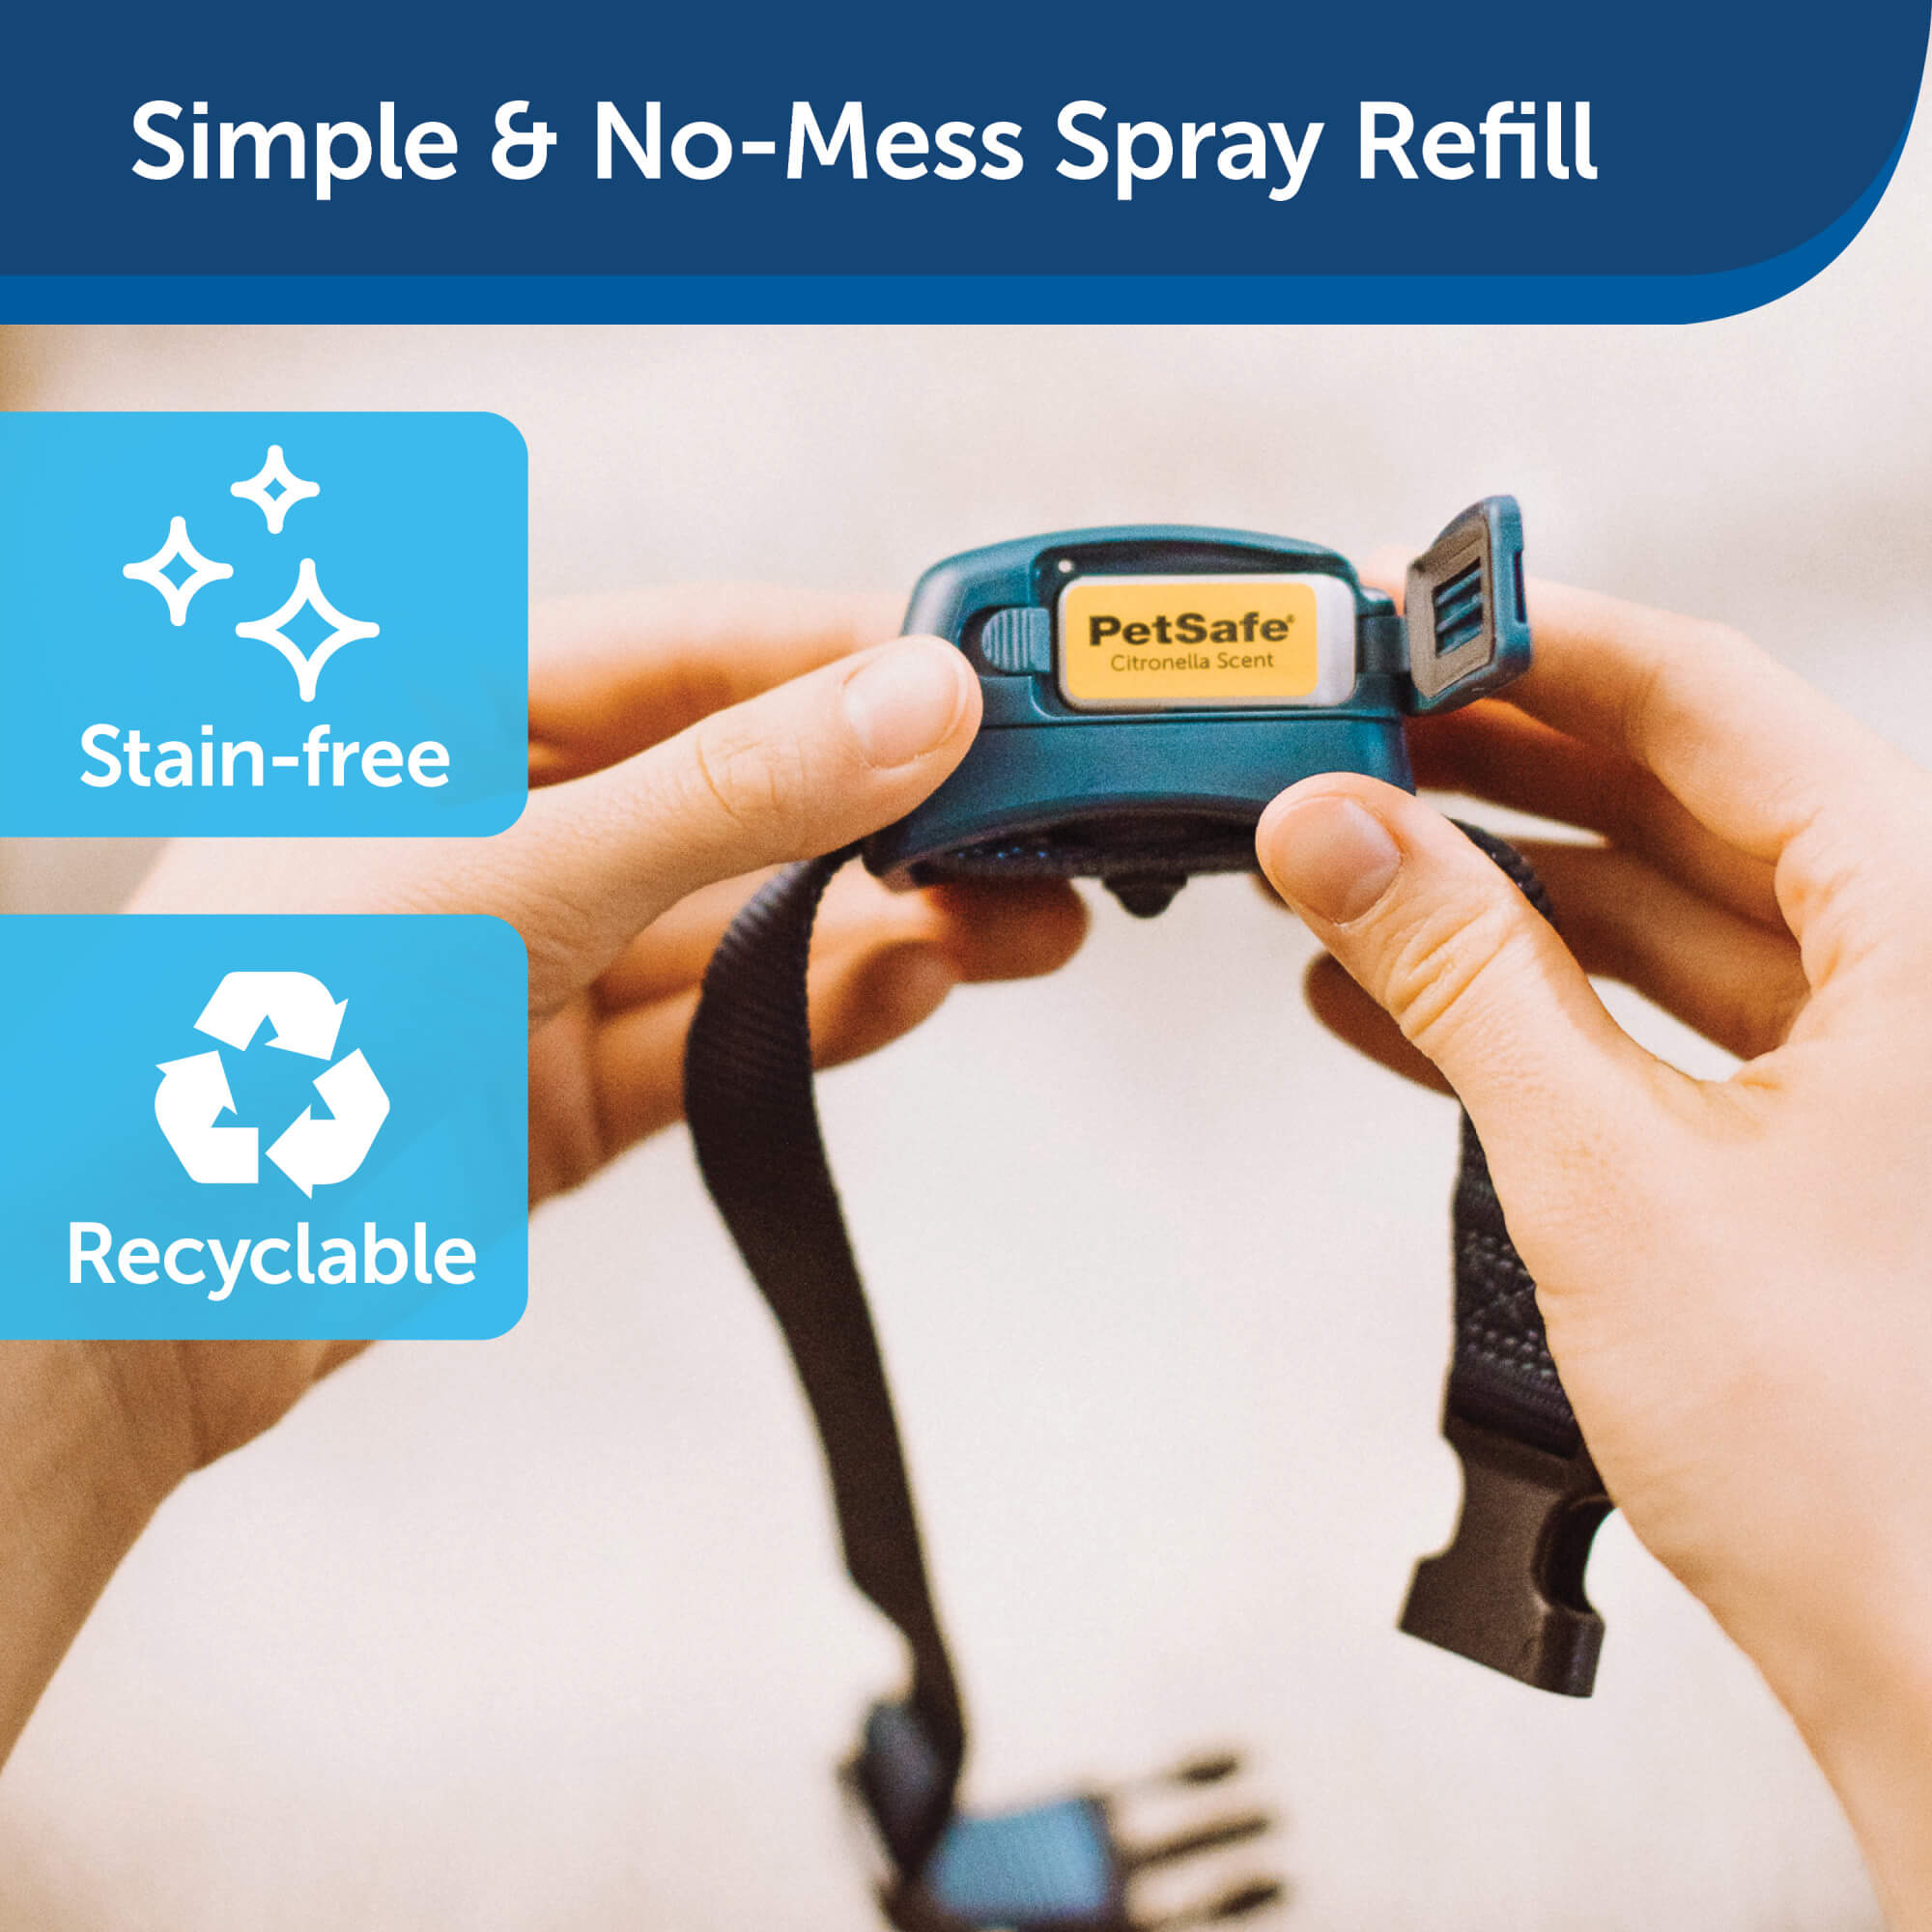 Simple and no-mess spray refill